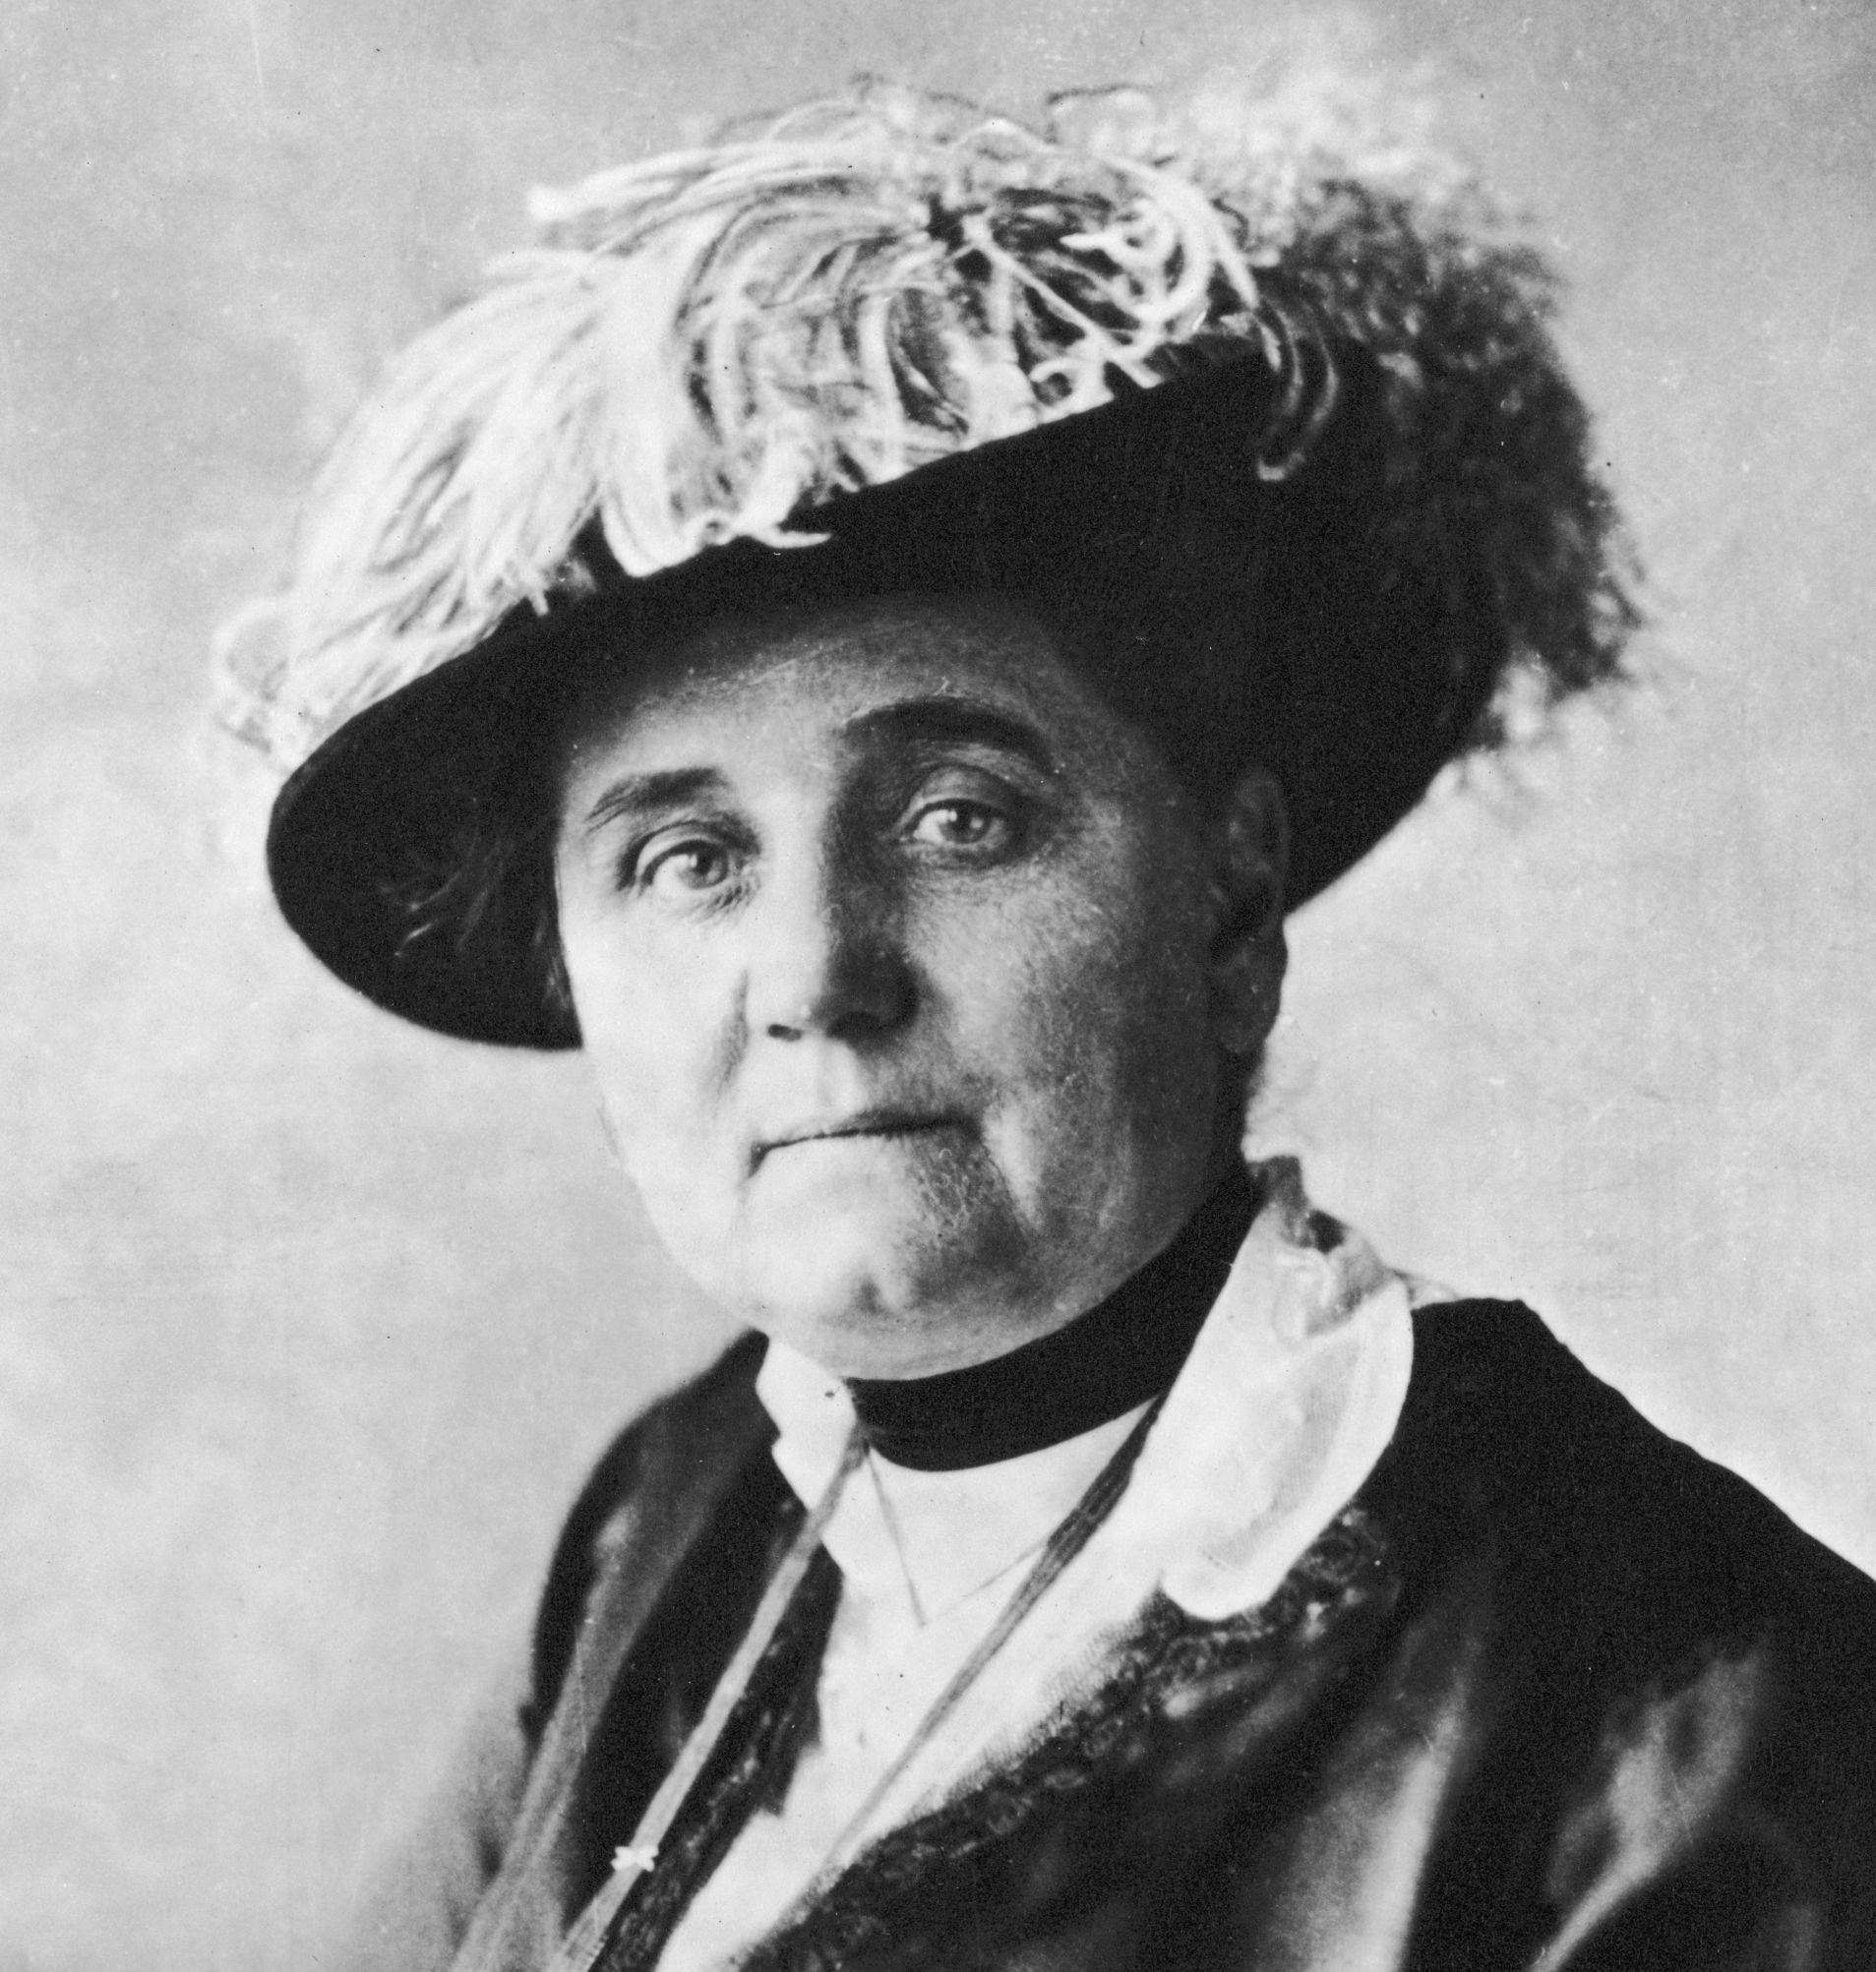 Suffragist of the Month – September | Long Island and the Woman Suffrage Movement